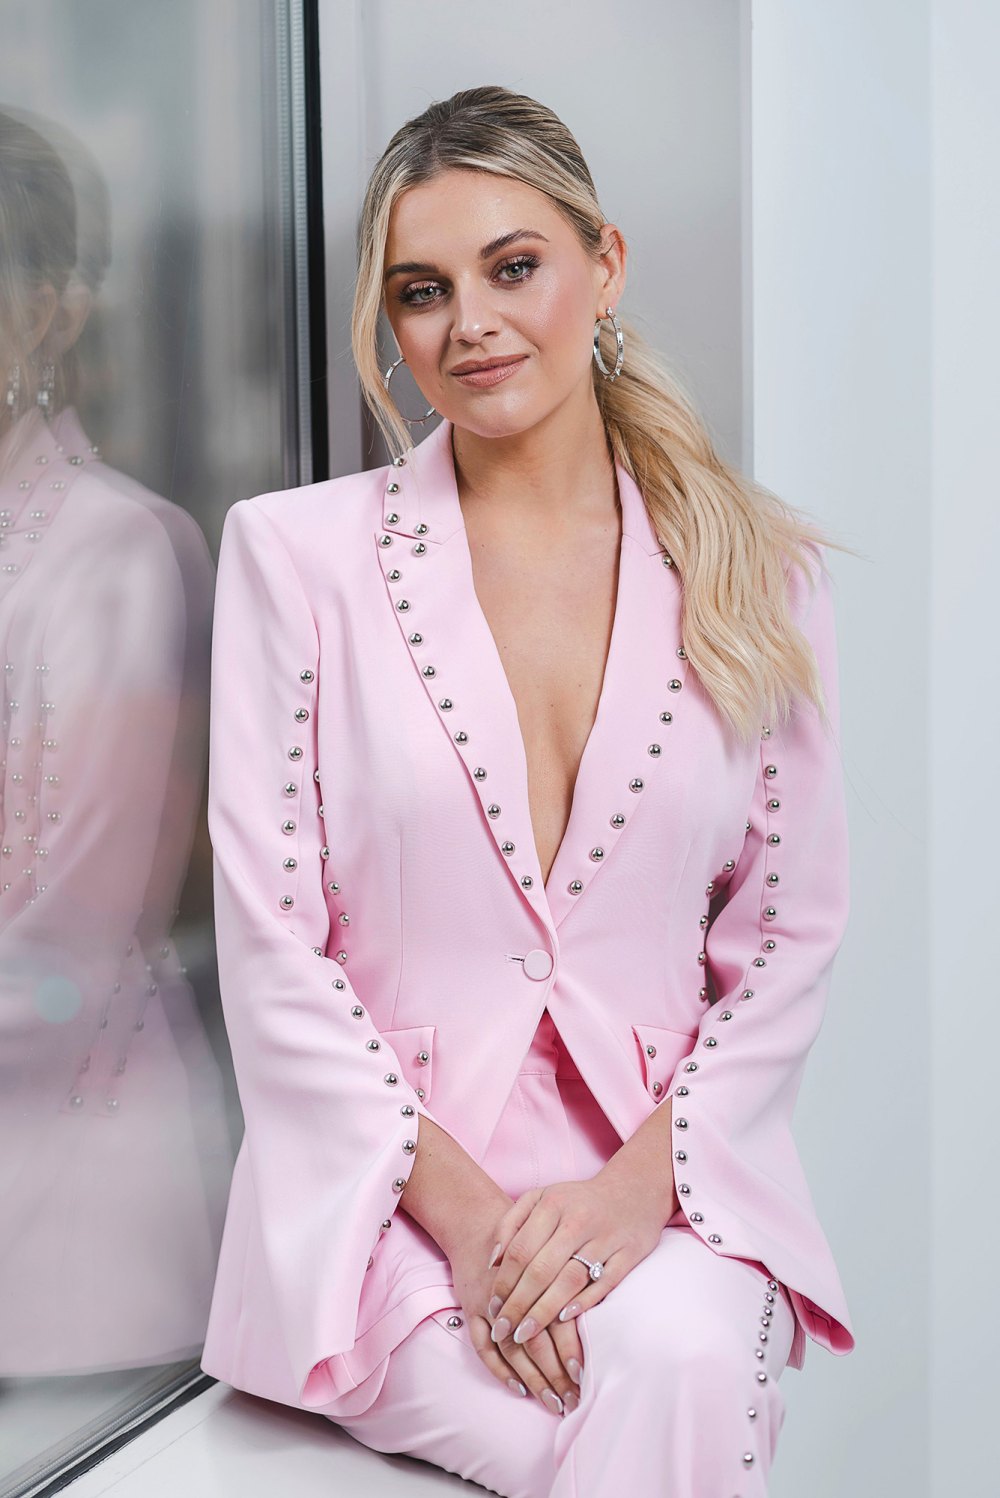 Kelsea Ballerini Discusses Divorce, Dating Rumors and More on 'Call Her Daddy'- Biggest Takeaways - 283